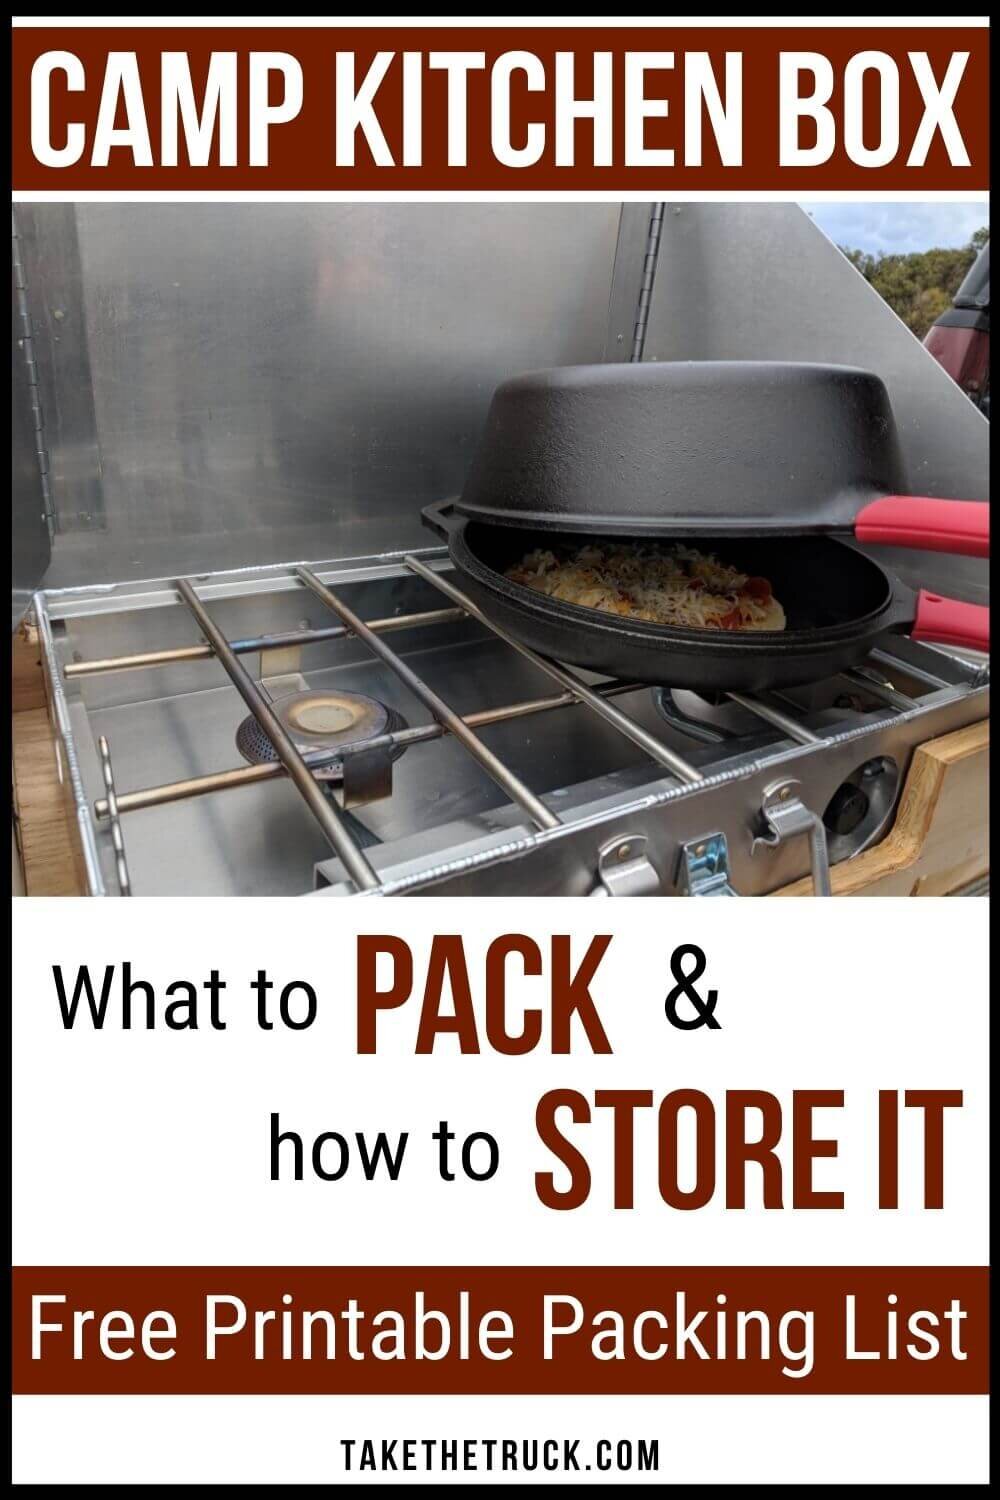 Guide for setting up a cheap camping kitchen.